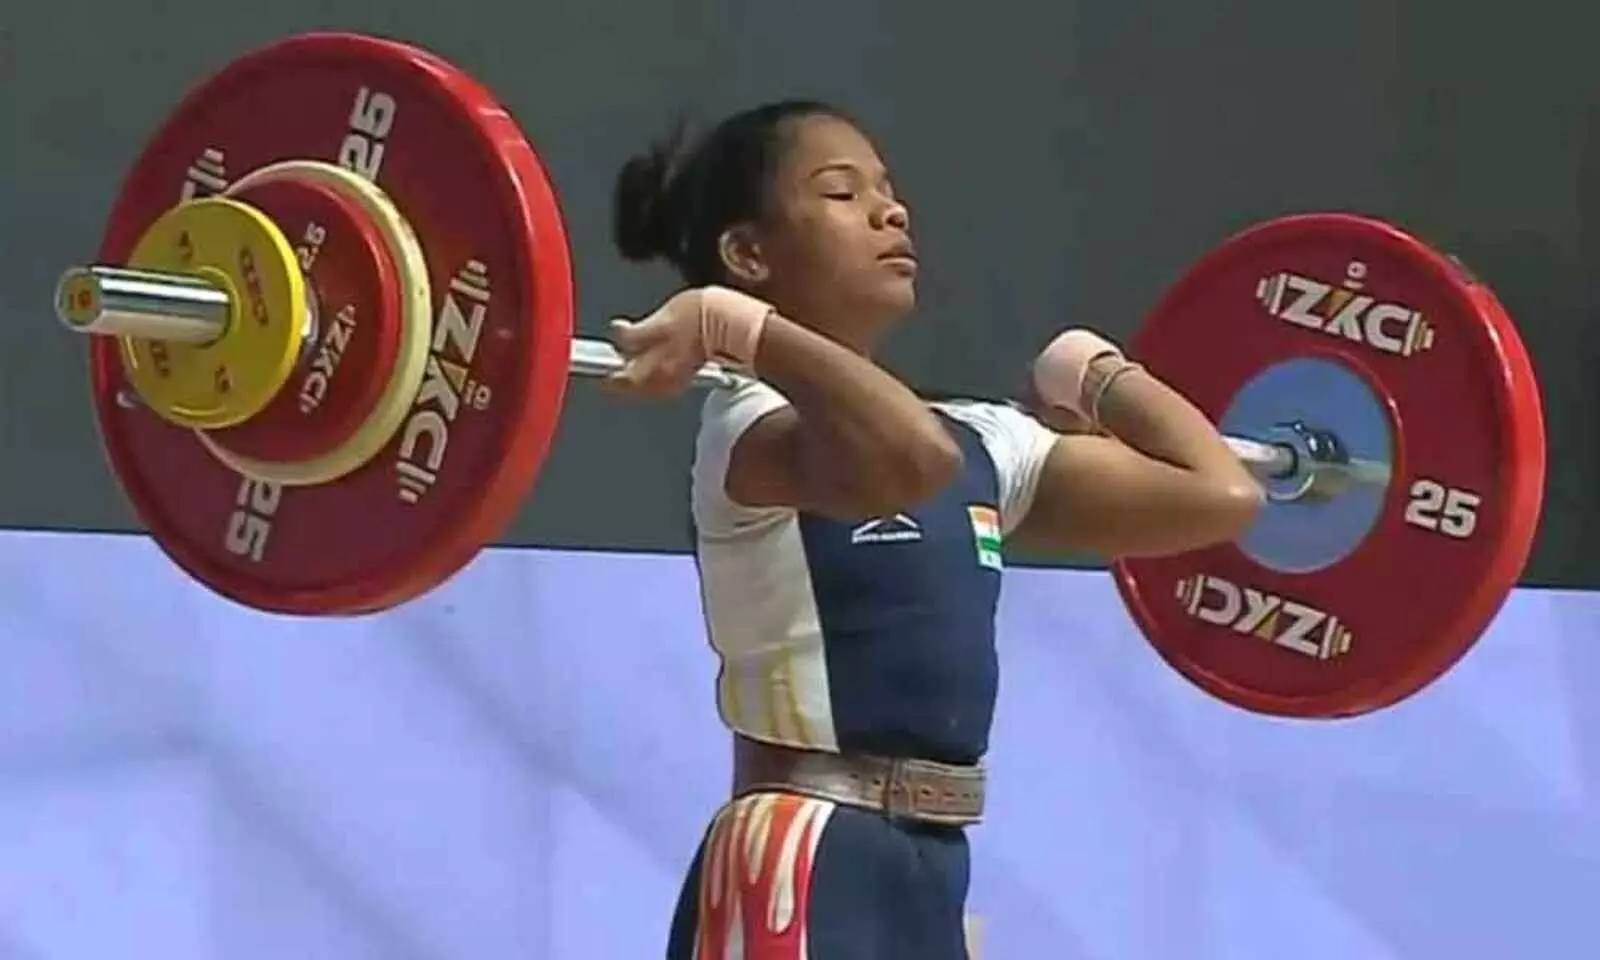 Indias Jhilli Dalabehera clinches gold medal at Commonwealth Weightlifting Championships